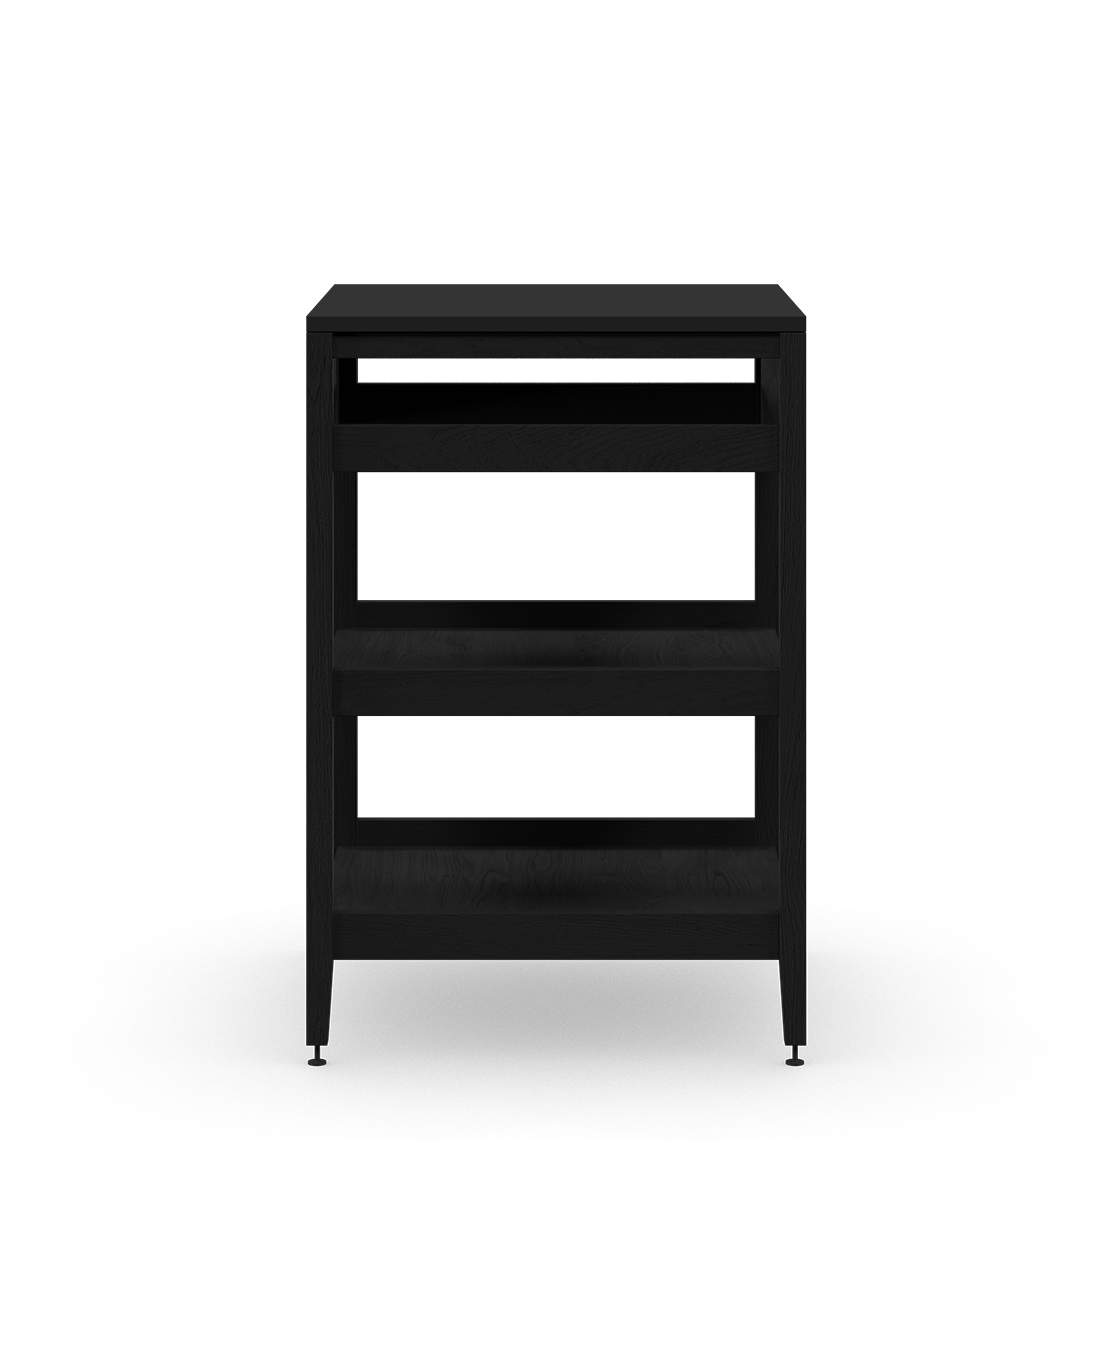 Coquo modular kitchen corner cabinet in black stained oak, fix front + two wood shelves. 